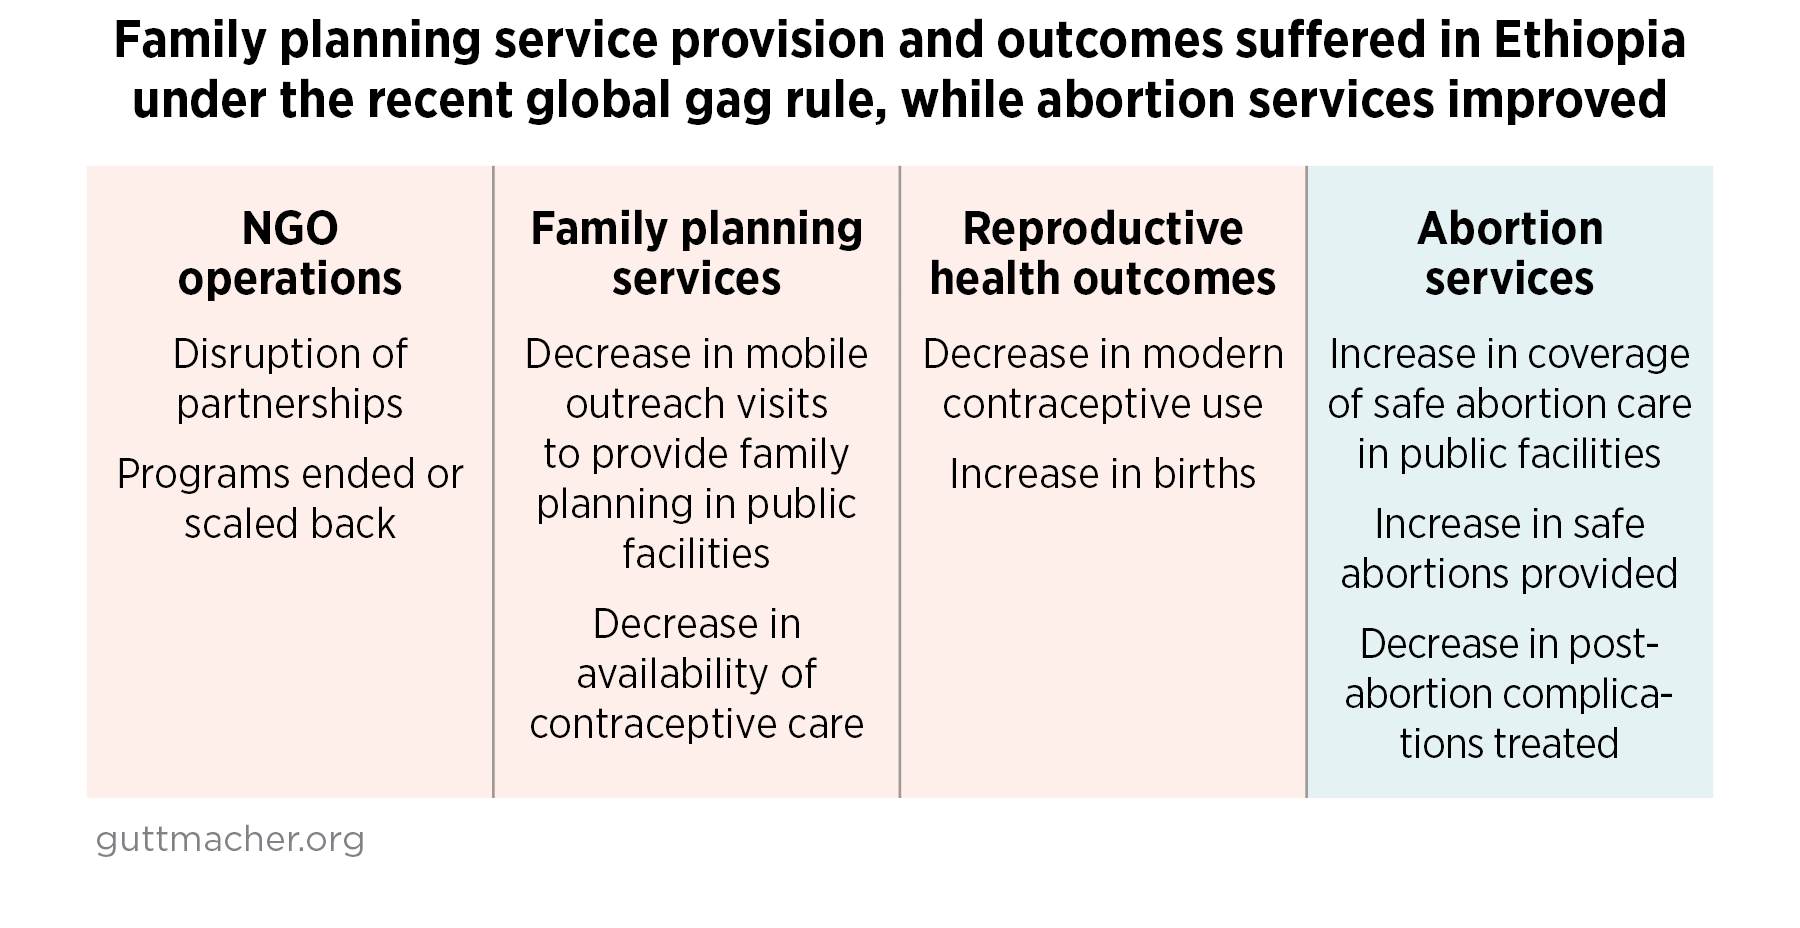 Impact Of The Trump Administration’s Global Gag Rule On Sexual And Reproductive Health In